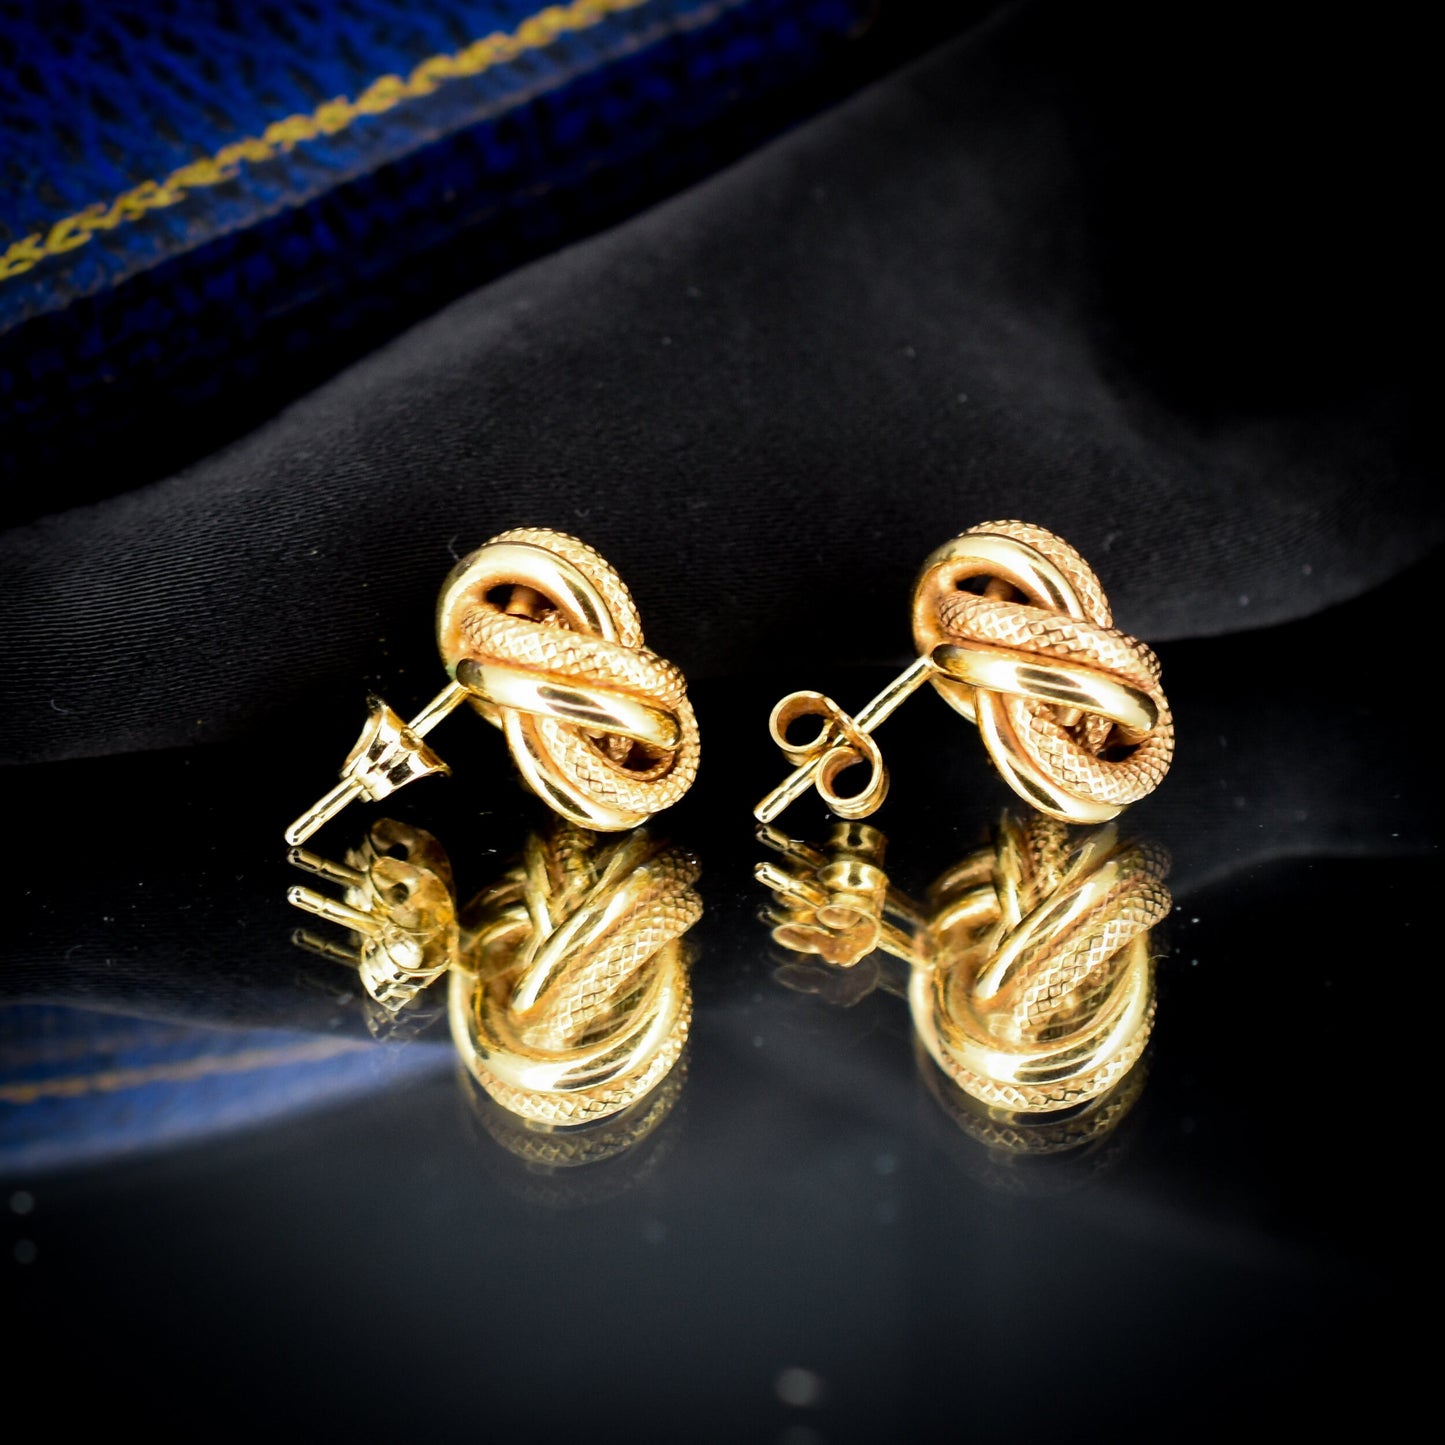 Vintage Lovers Knot 9ct Yellow Gold Stud Earrings